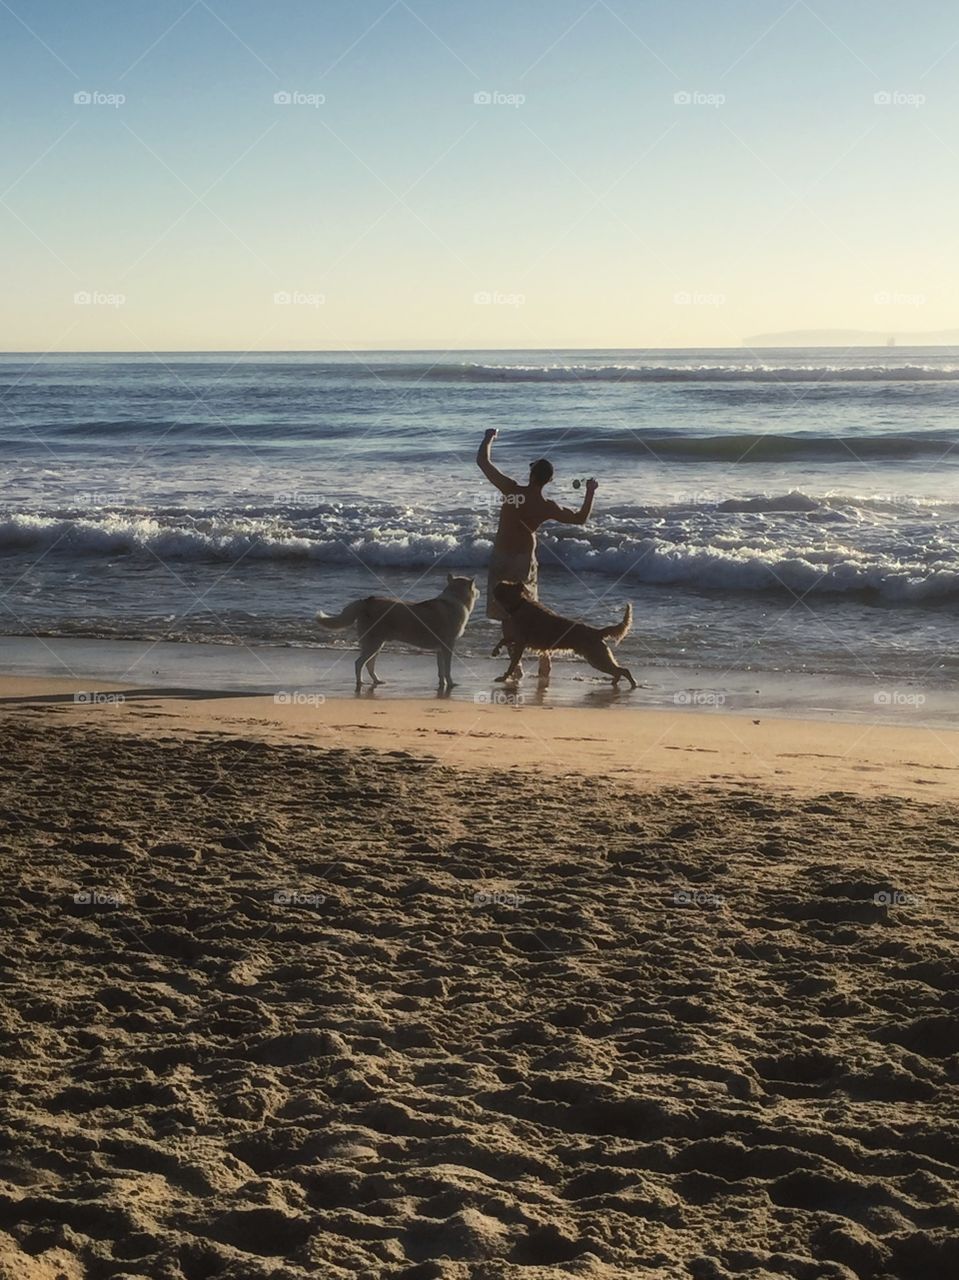 Dogs playing at the beach. 